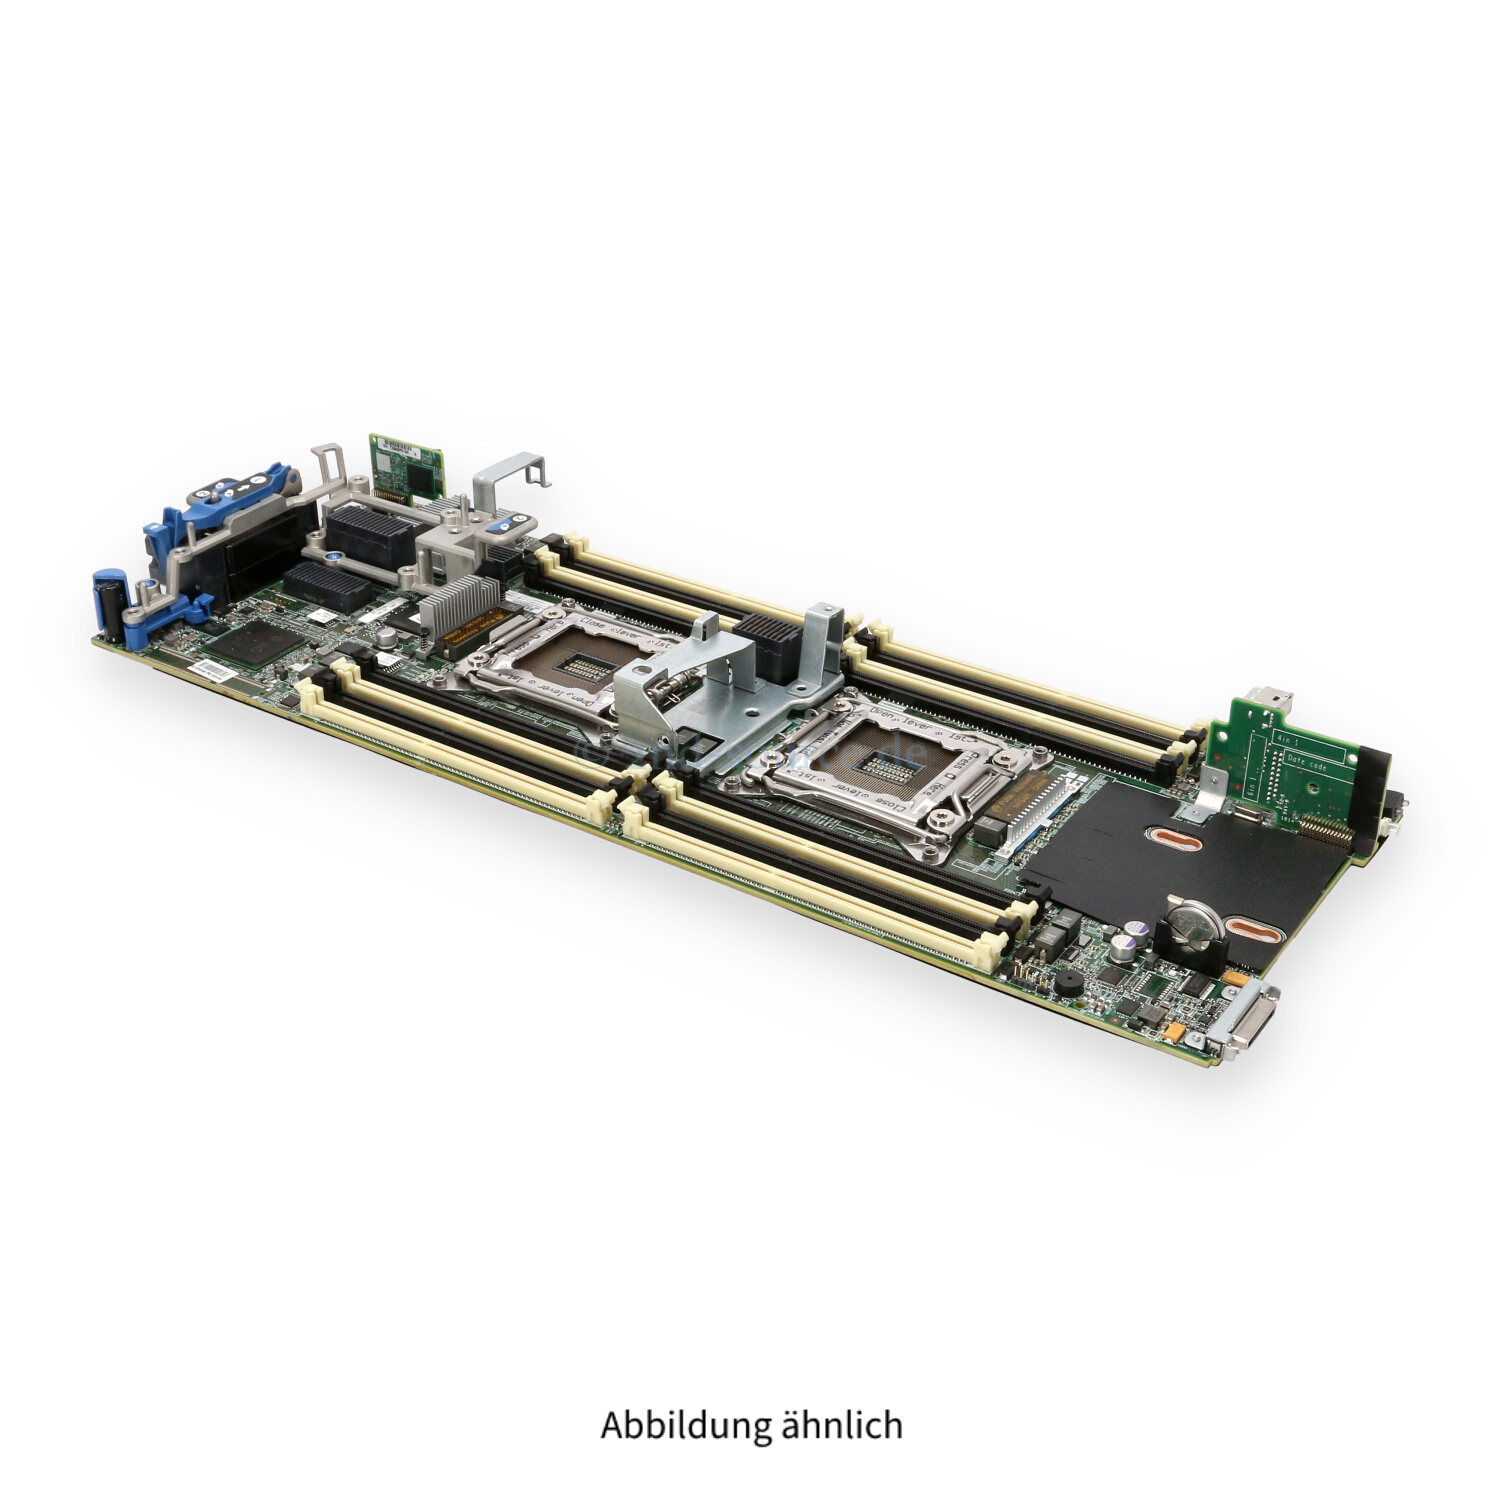 HPE Systemboard BL460c G8 738239-001 640870-007